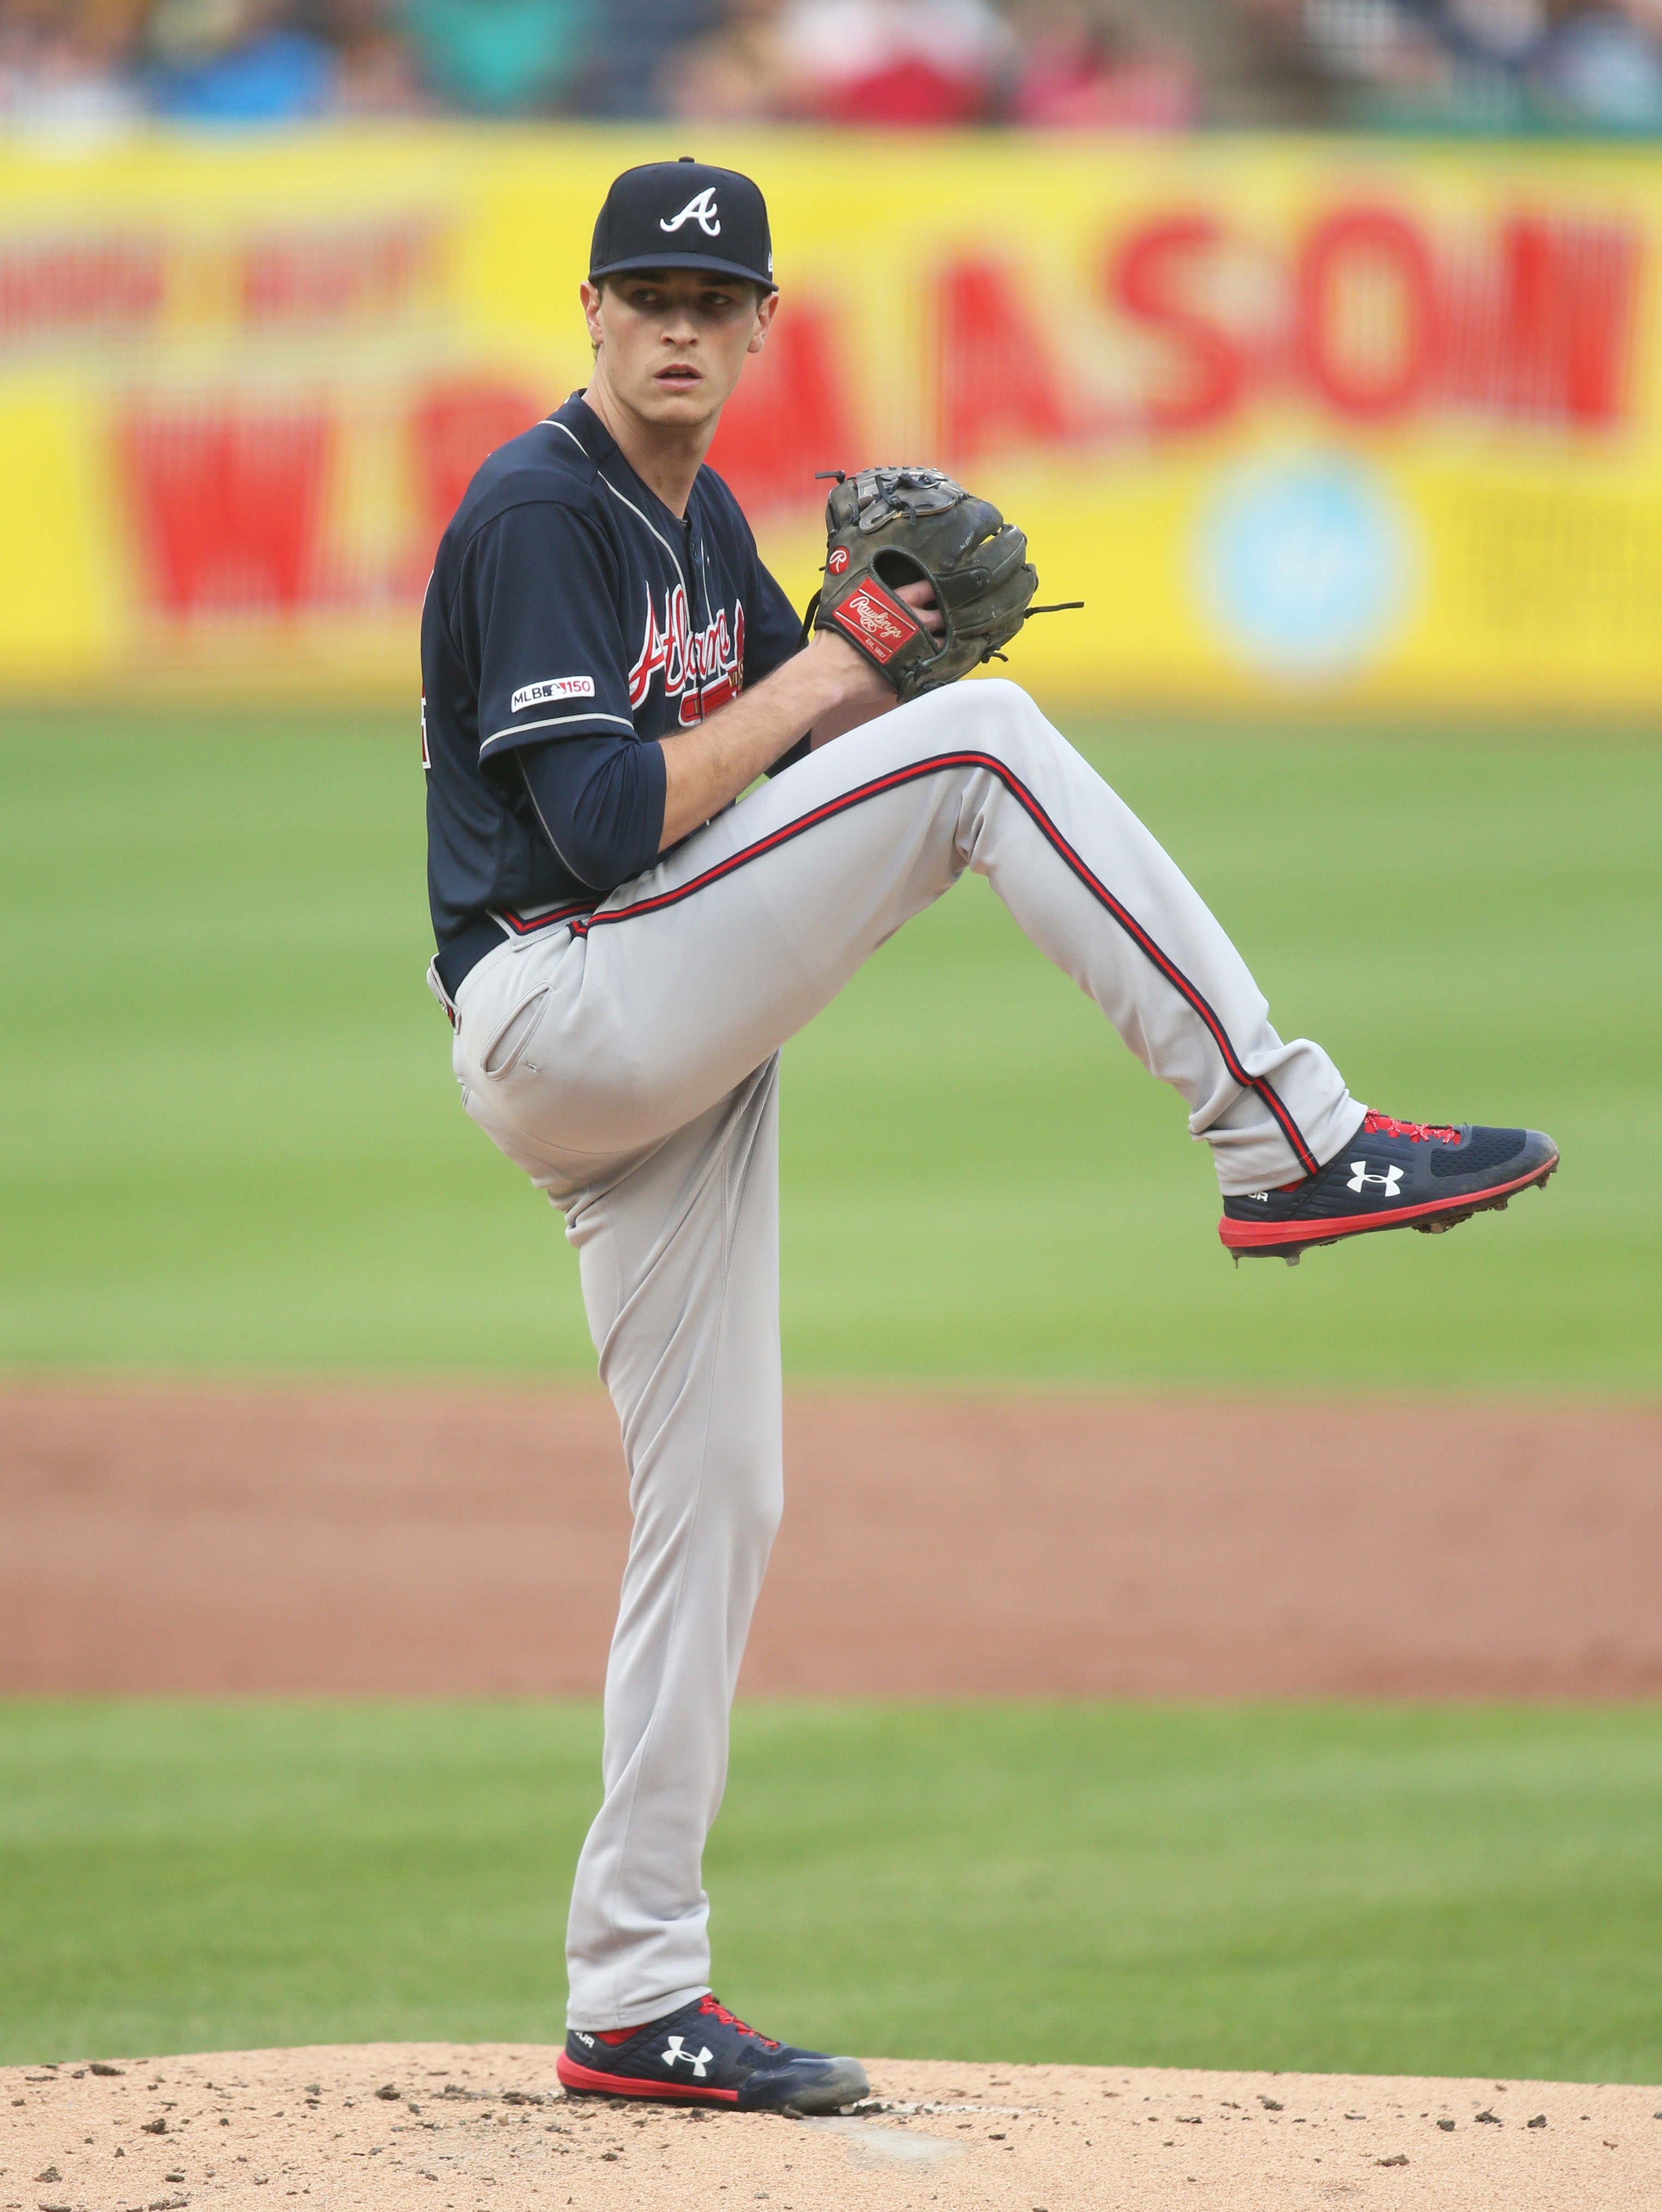 Max Fried keeping me safe on the road. : r/Braves